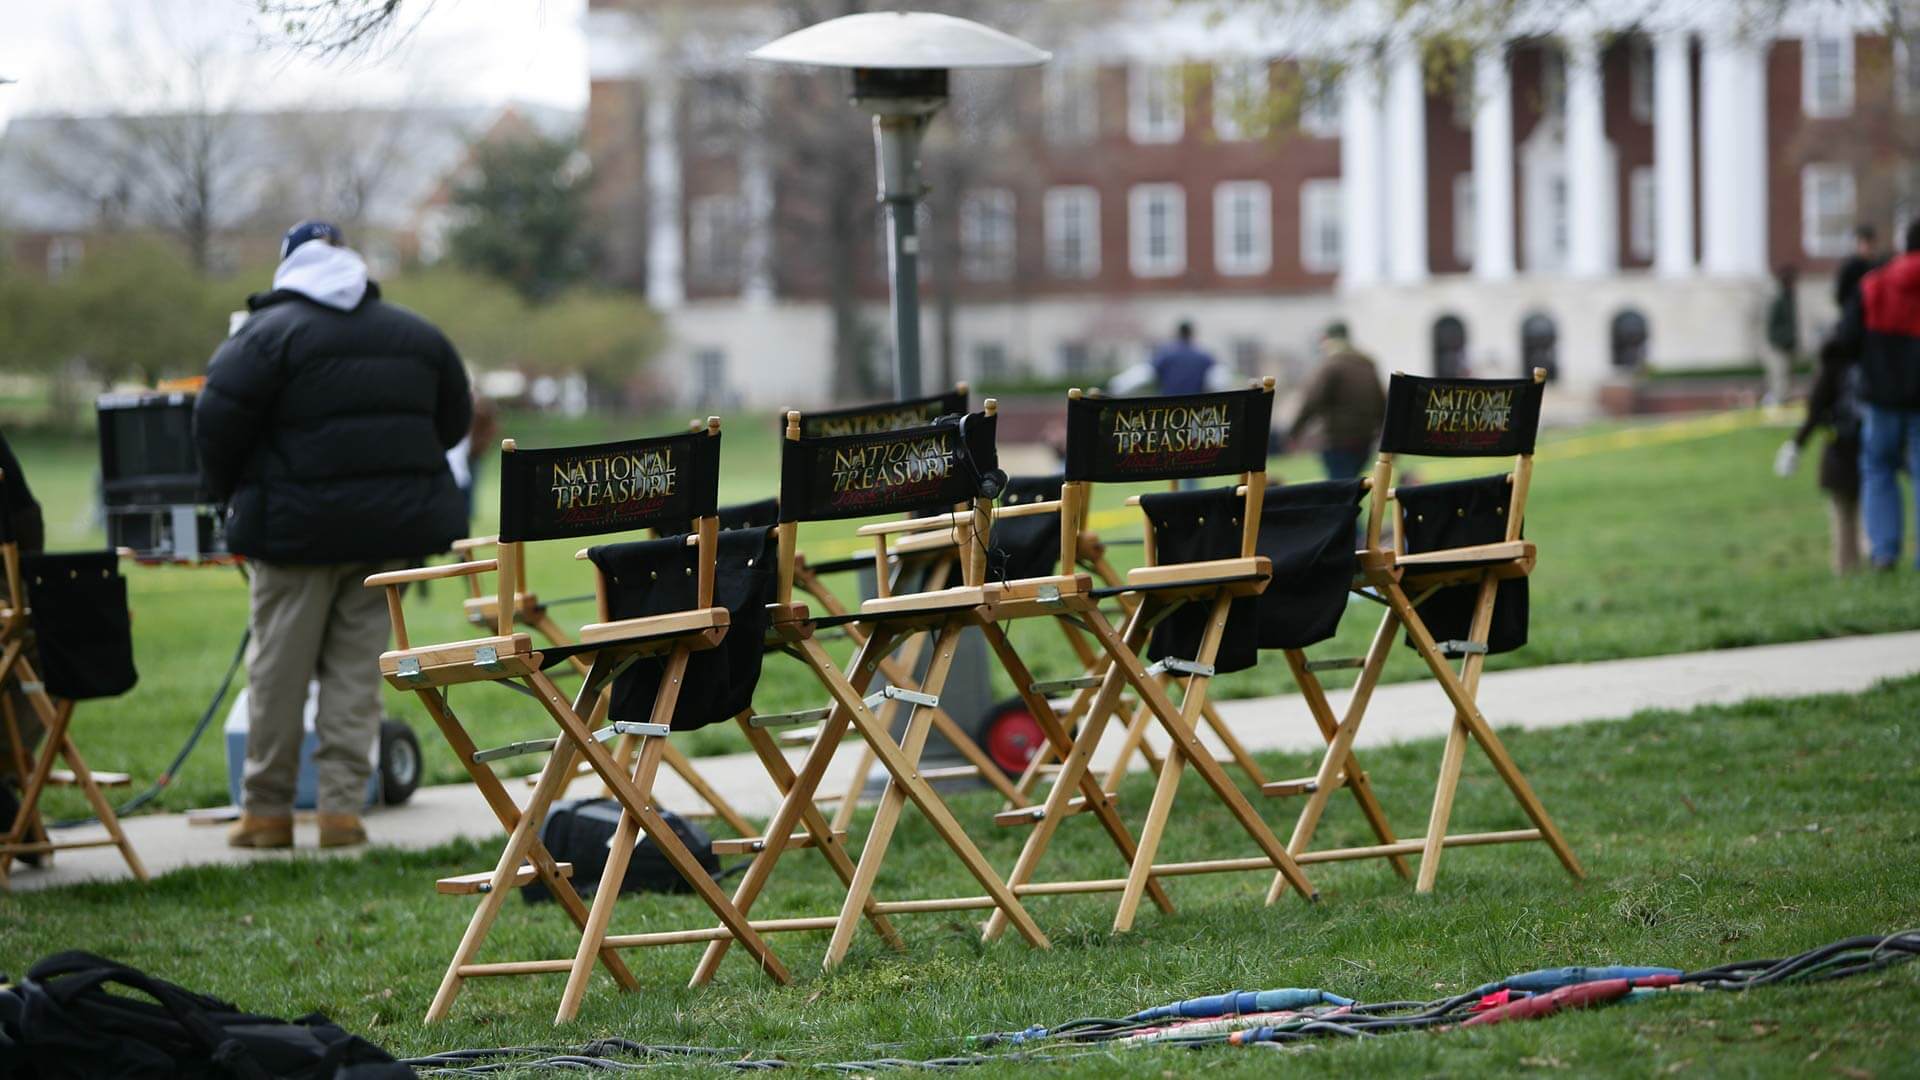 Chairs on UMD campus during "National Treasure II" filming